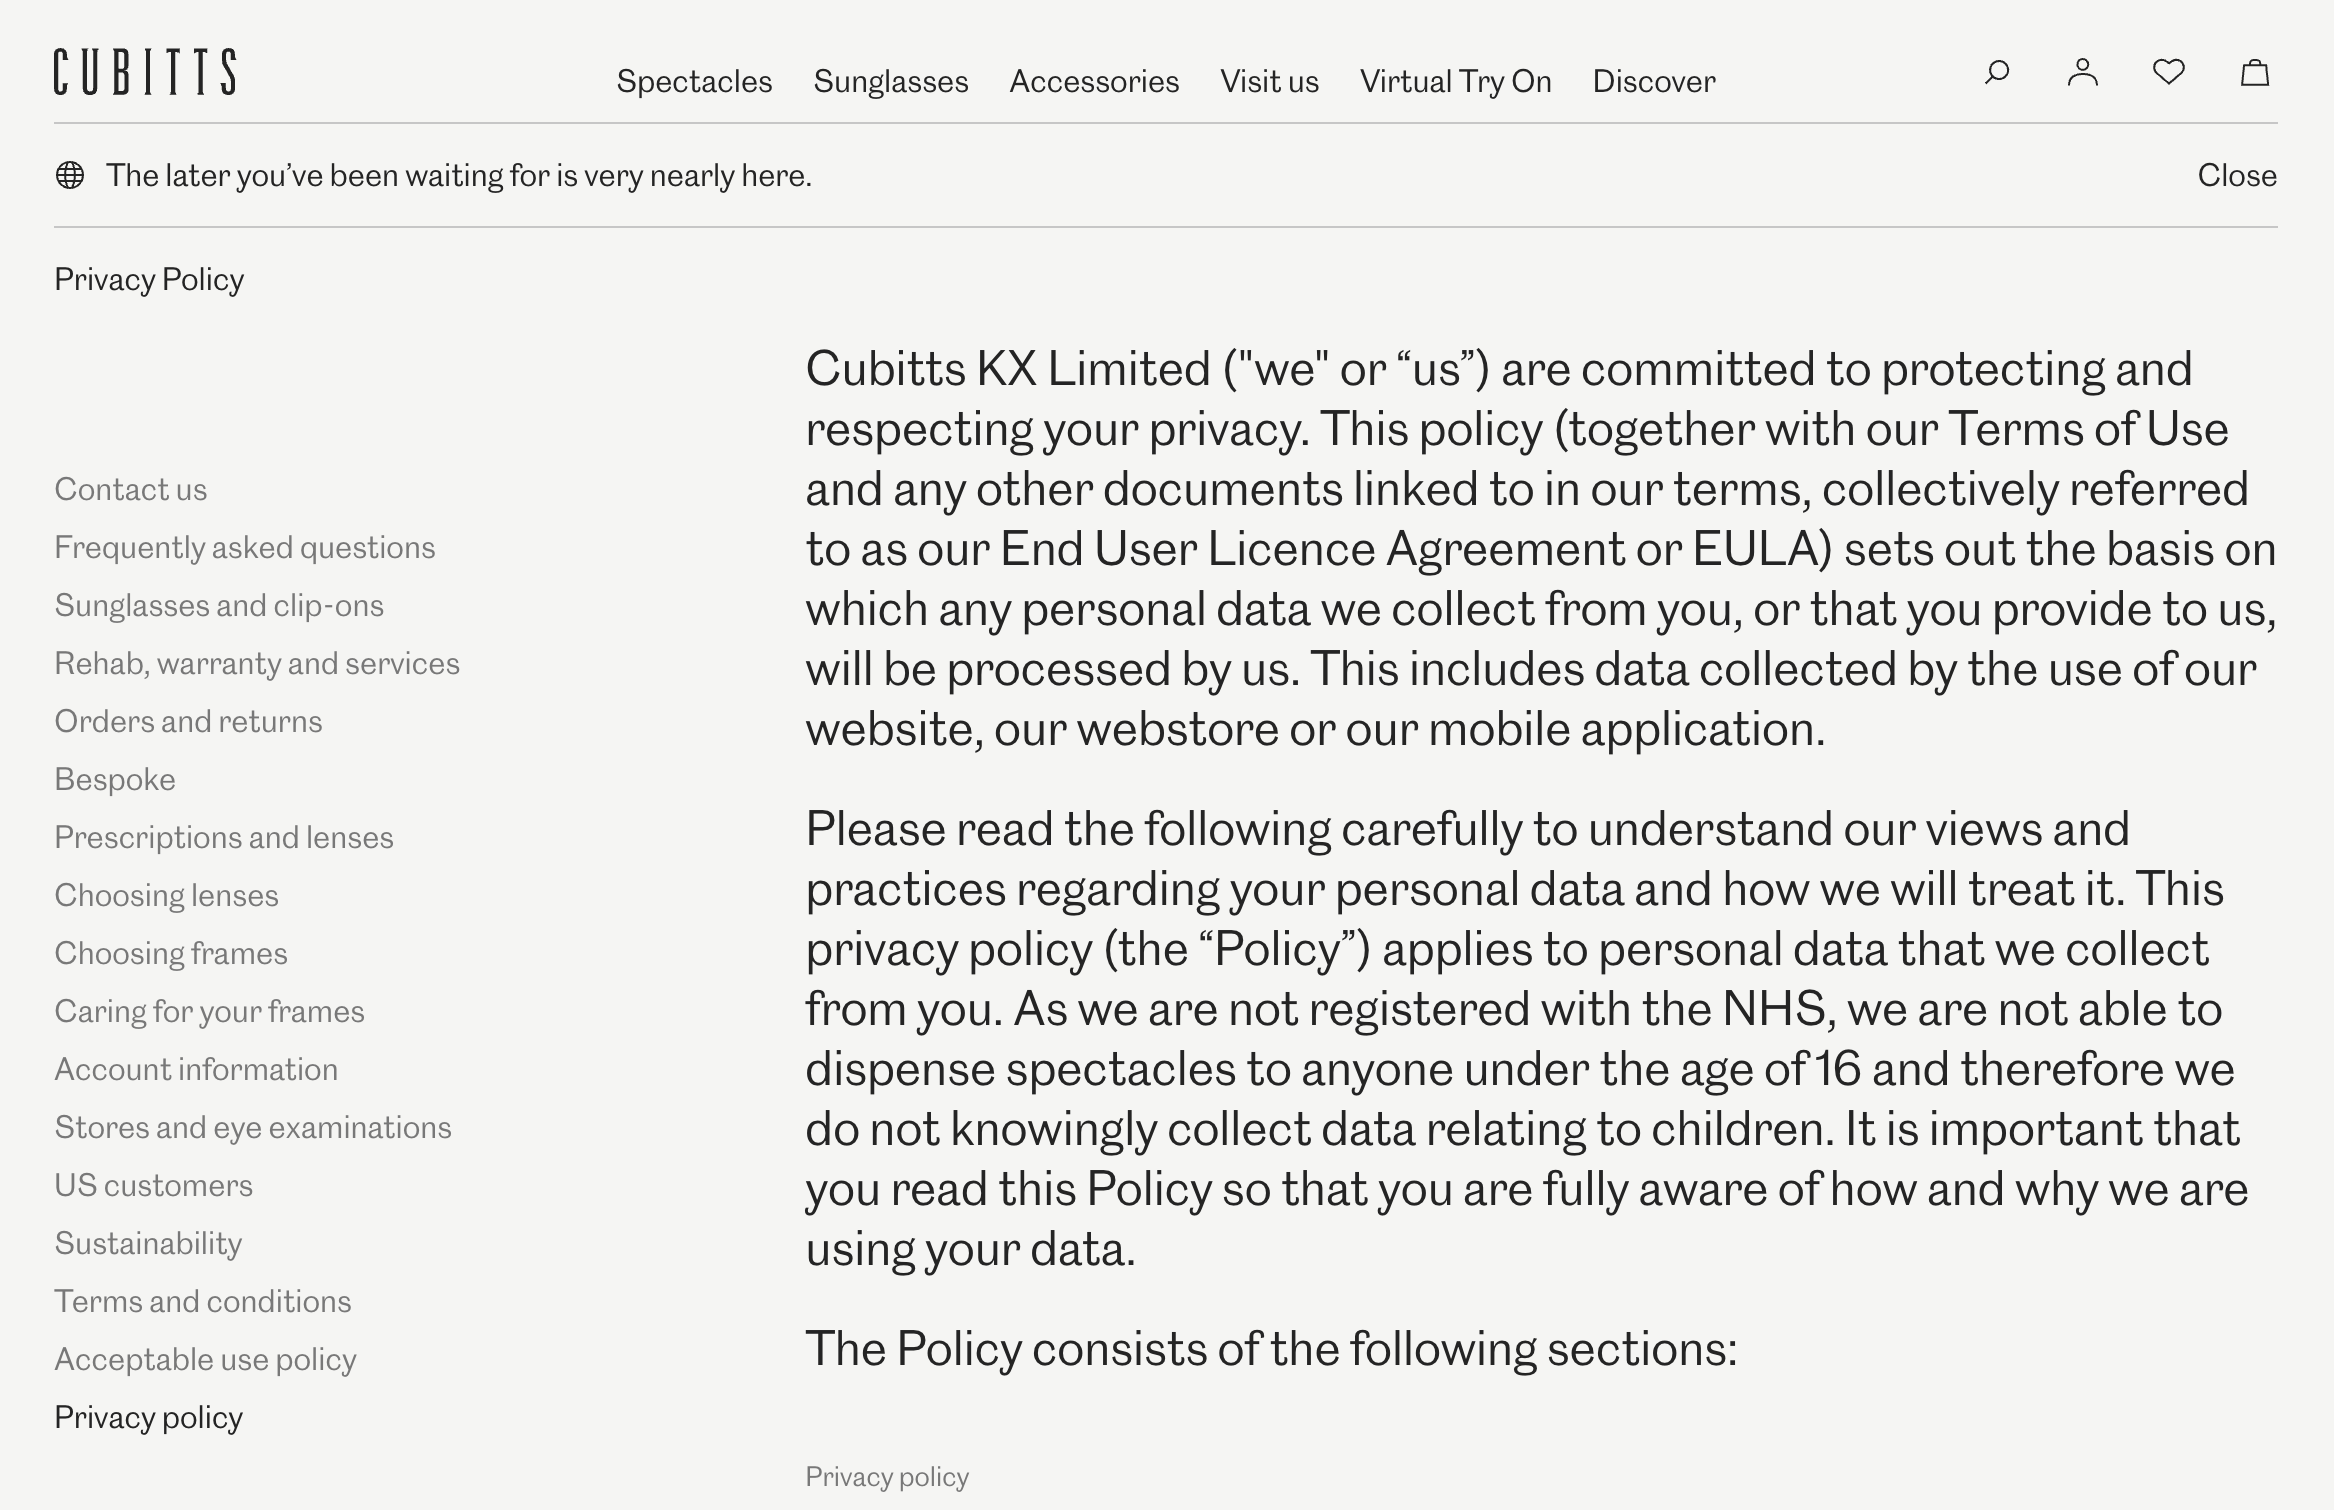 Ecommerce privacy policy page for online business Cubitts